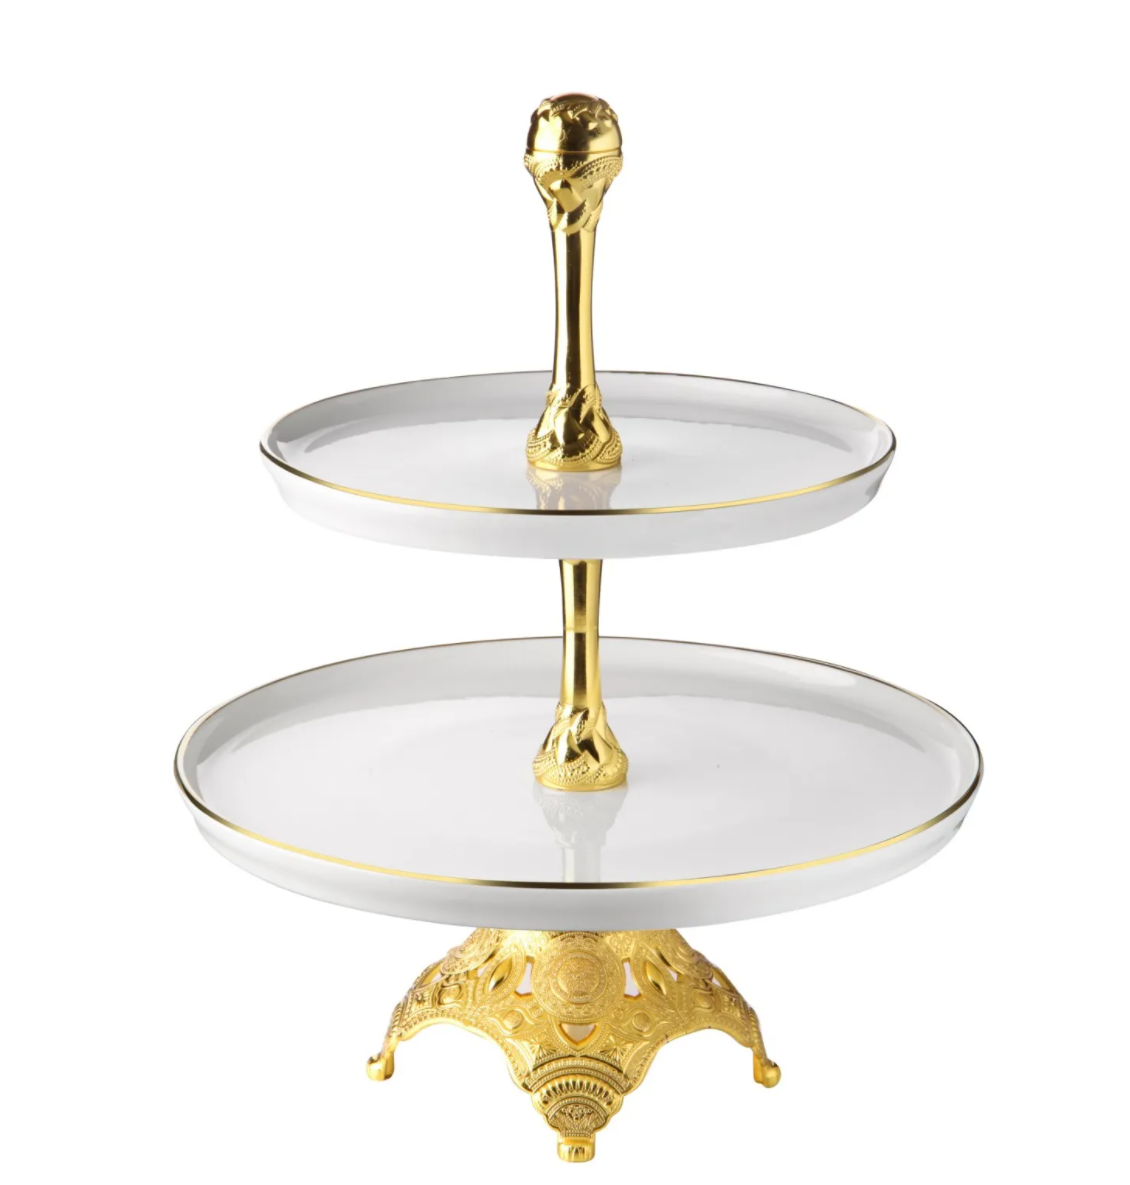 Gold and White Serving Tier